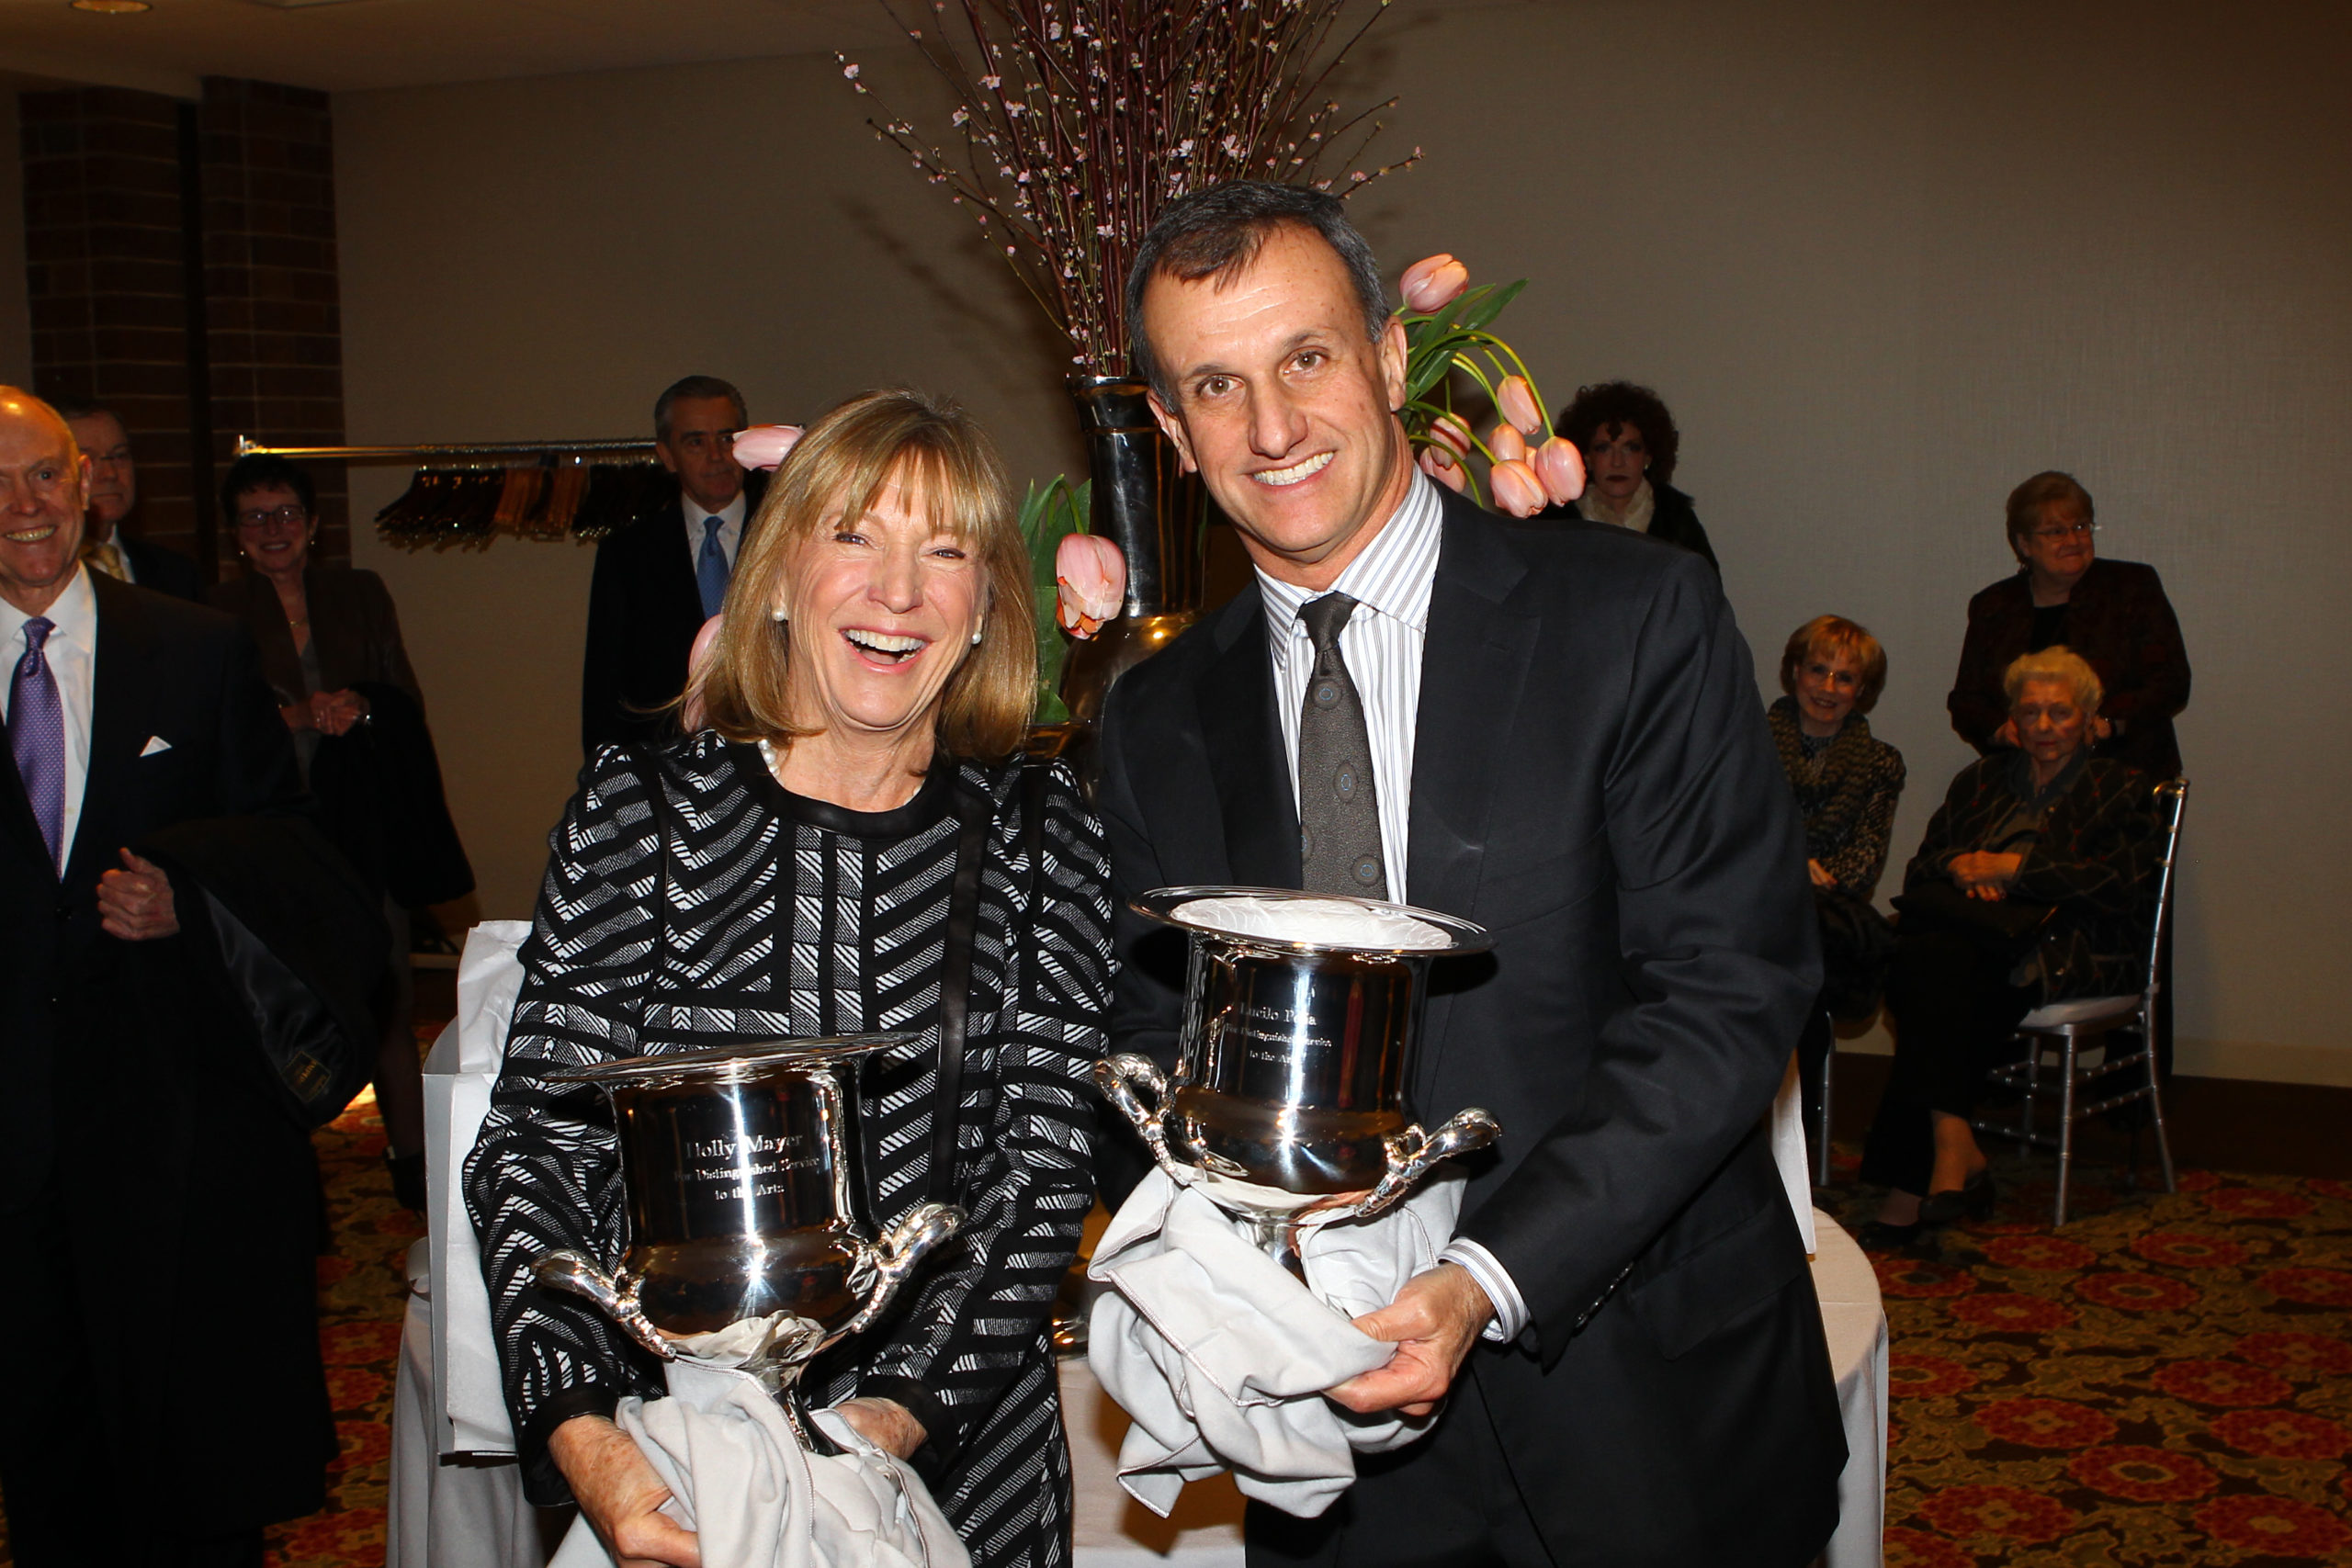 2014 Silver Cup Honorees, Holly Mayer and Lucilo Pena,  smiling